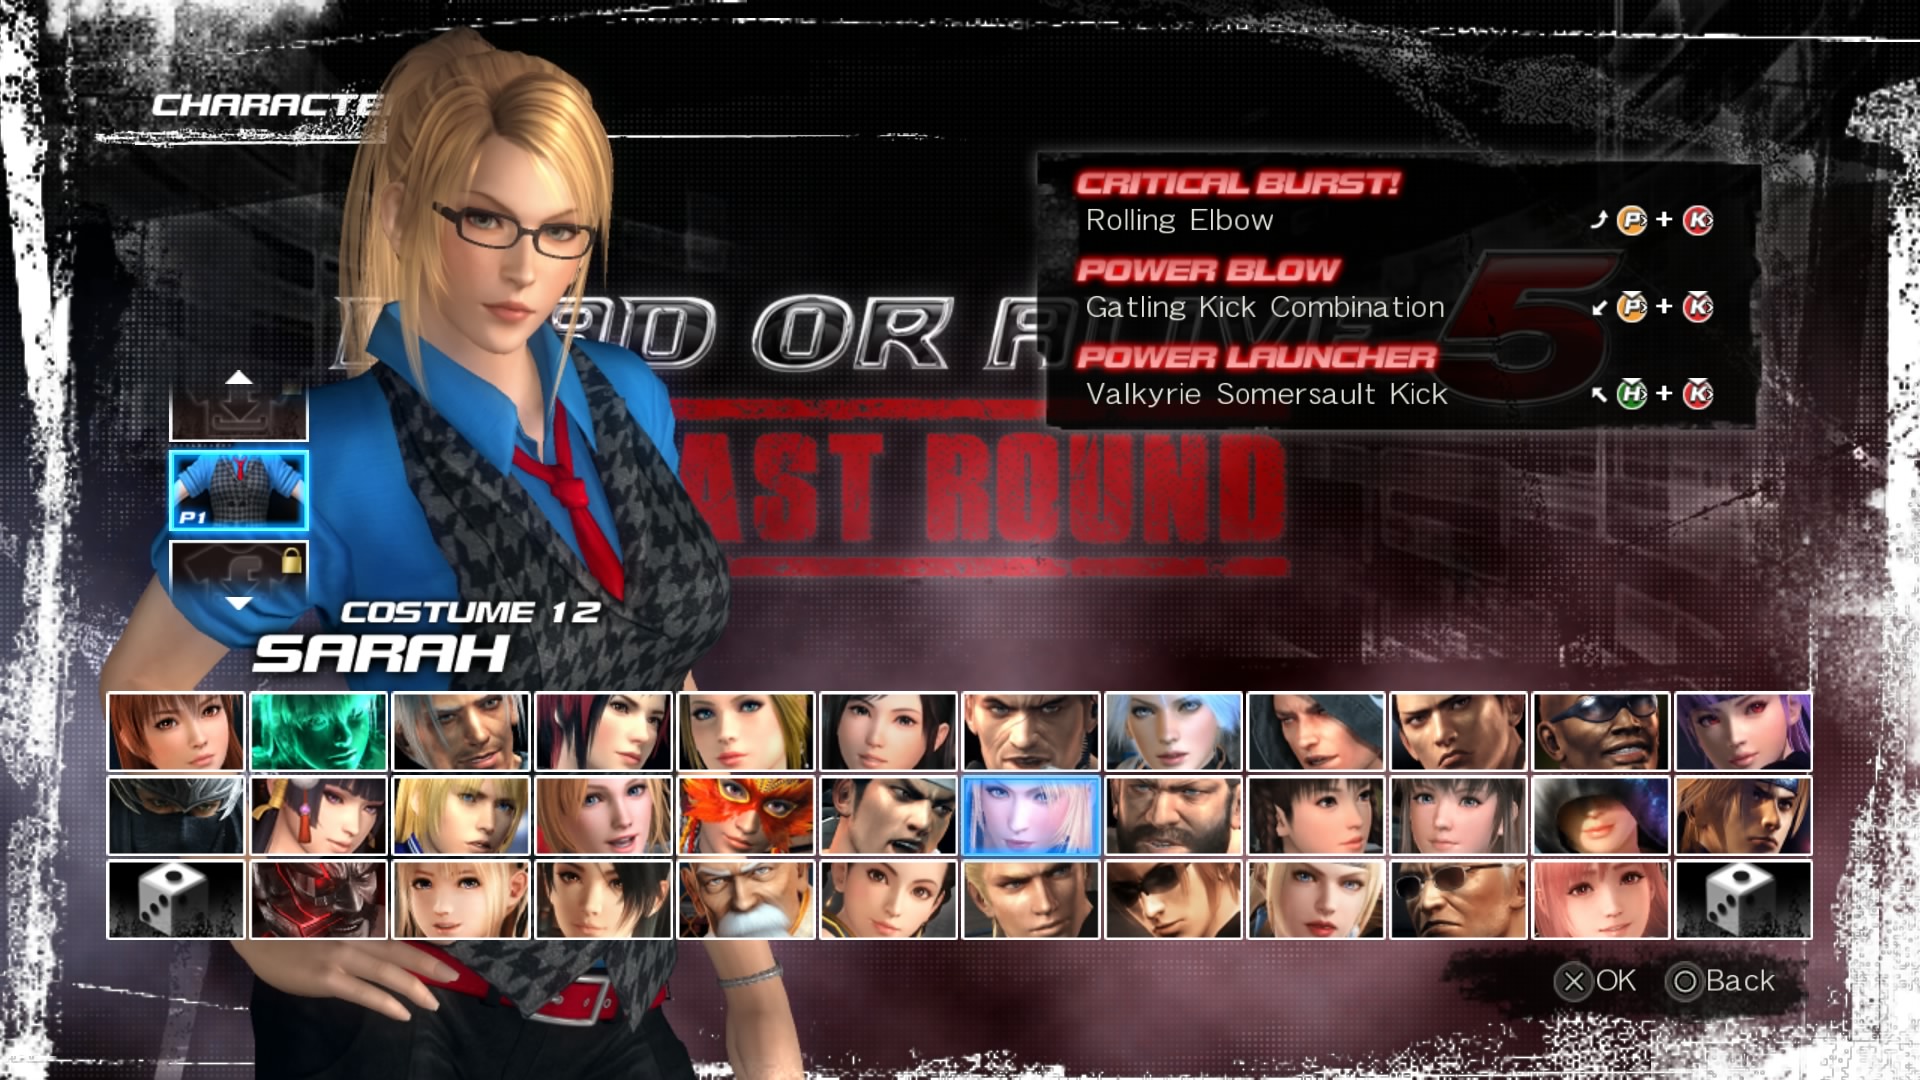 Dead or Alive 5: Last Round for PlayStation 3